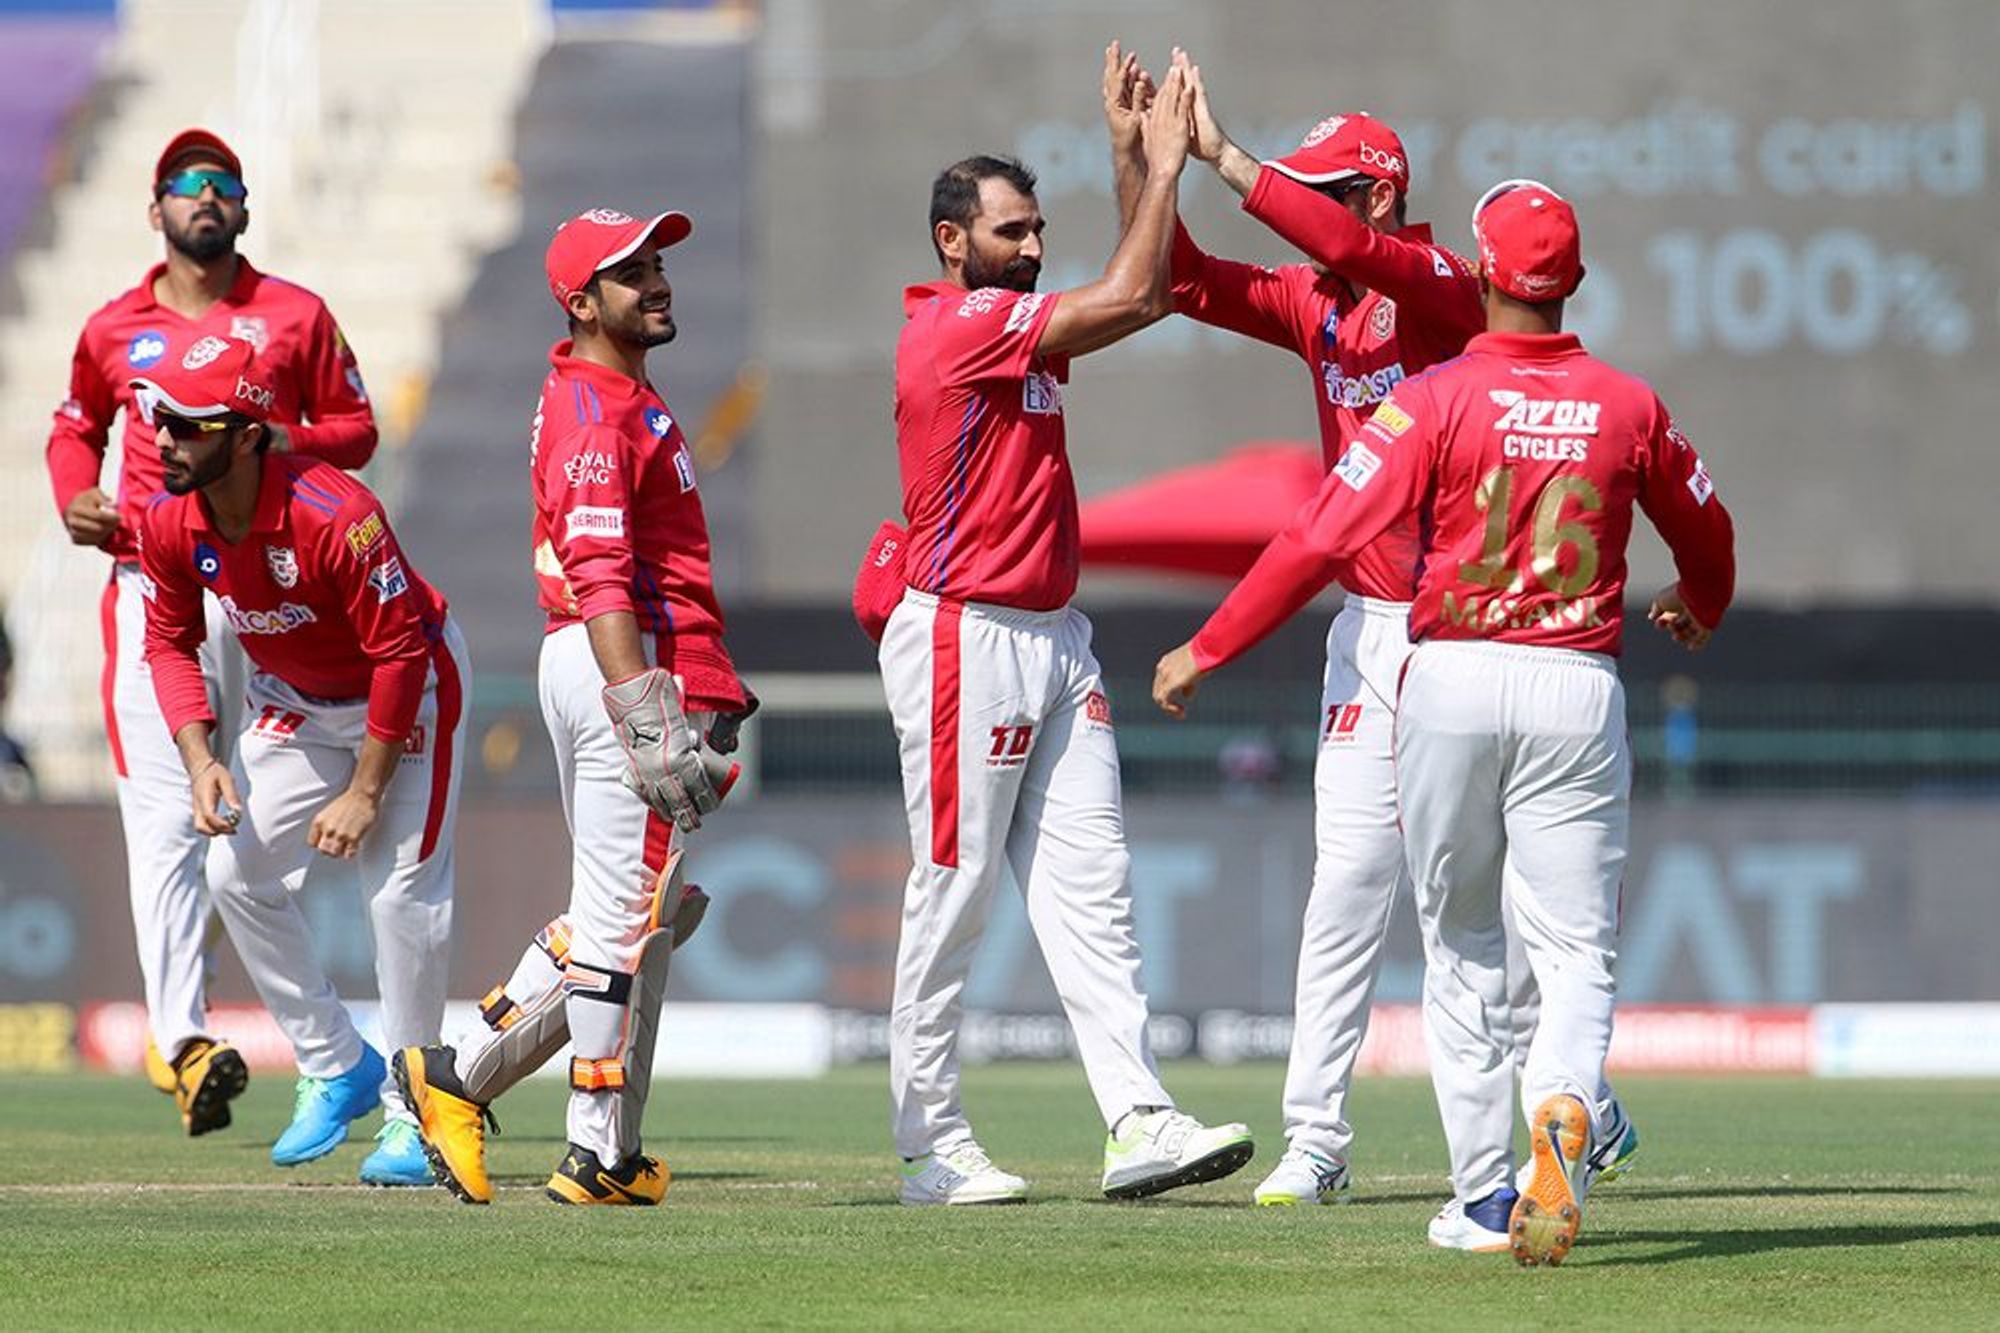 IPL 2020: KXIP restrict KKR to 164 for 6 in Abu Dhabi